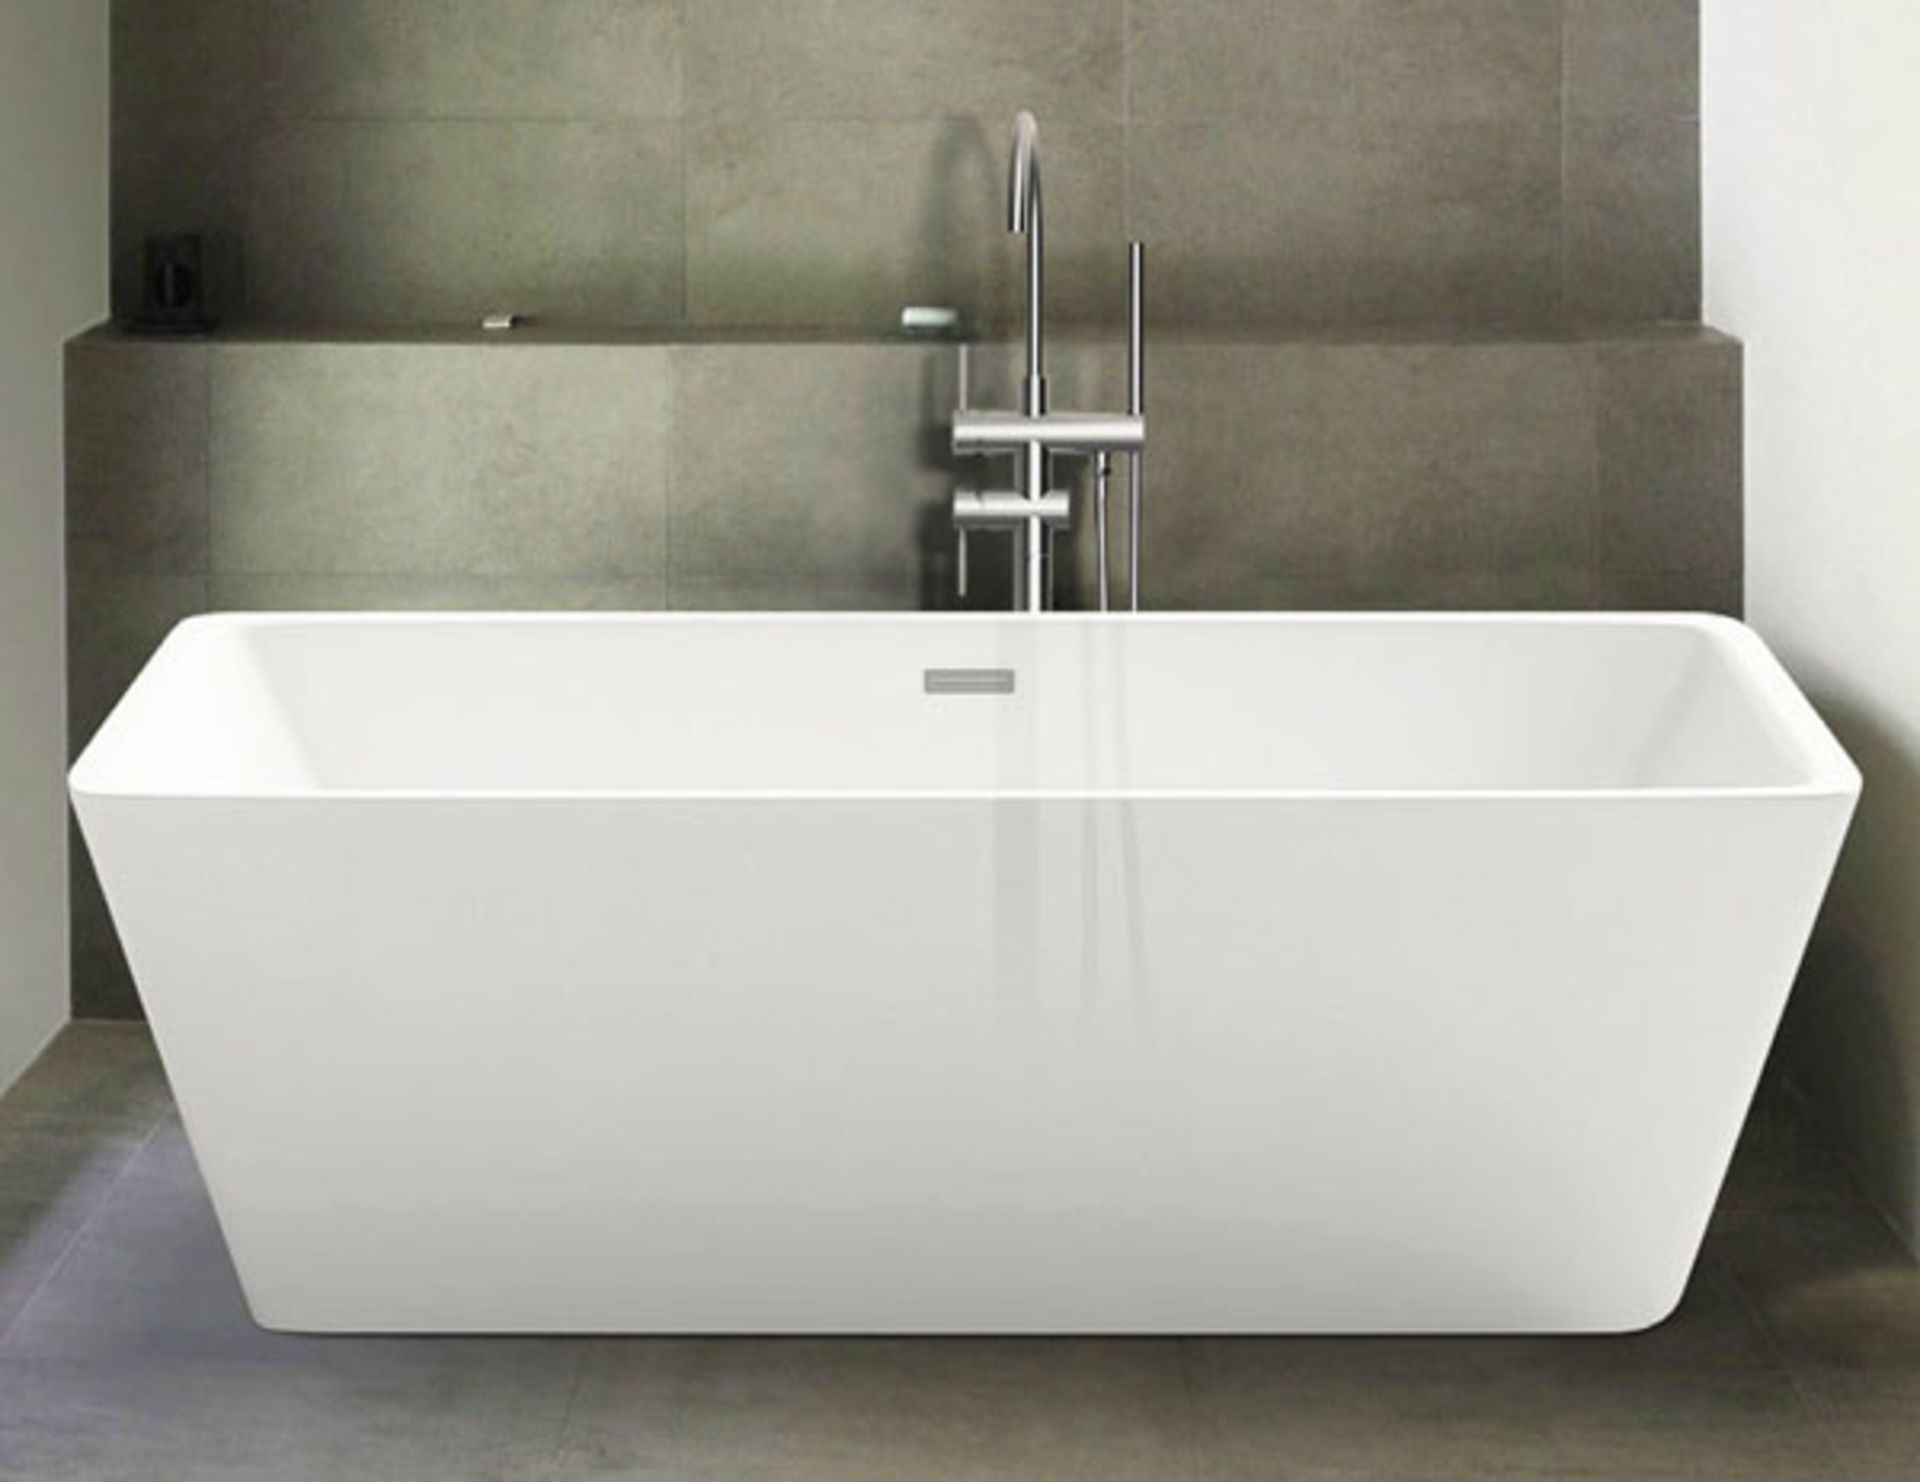 NEW (M5) 1600x800mm Hoxton Freestanding Bath. RRP £2,999.As a result of precise design Hoxton...